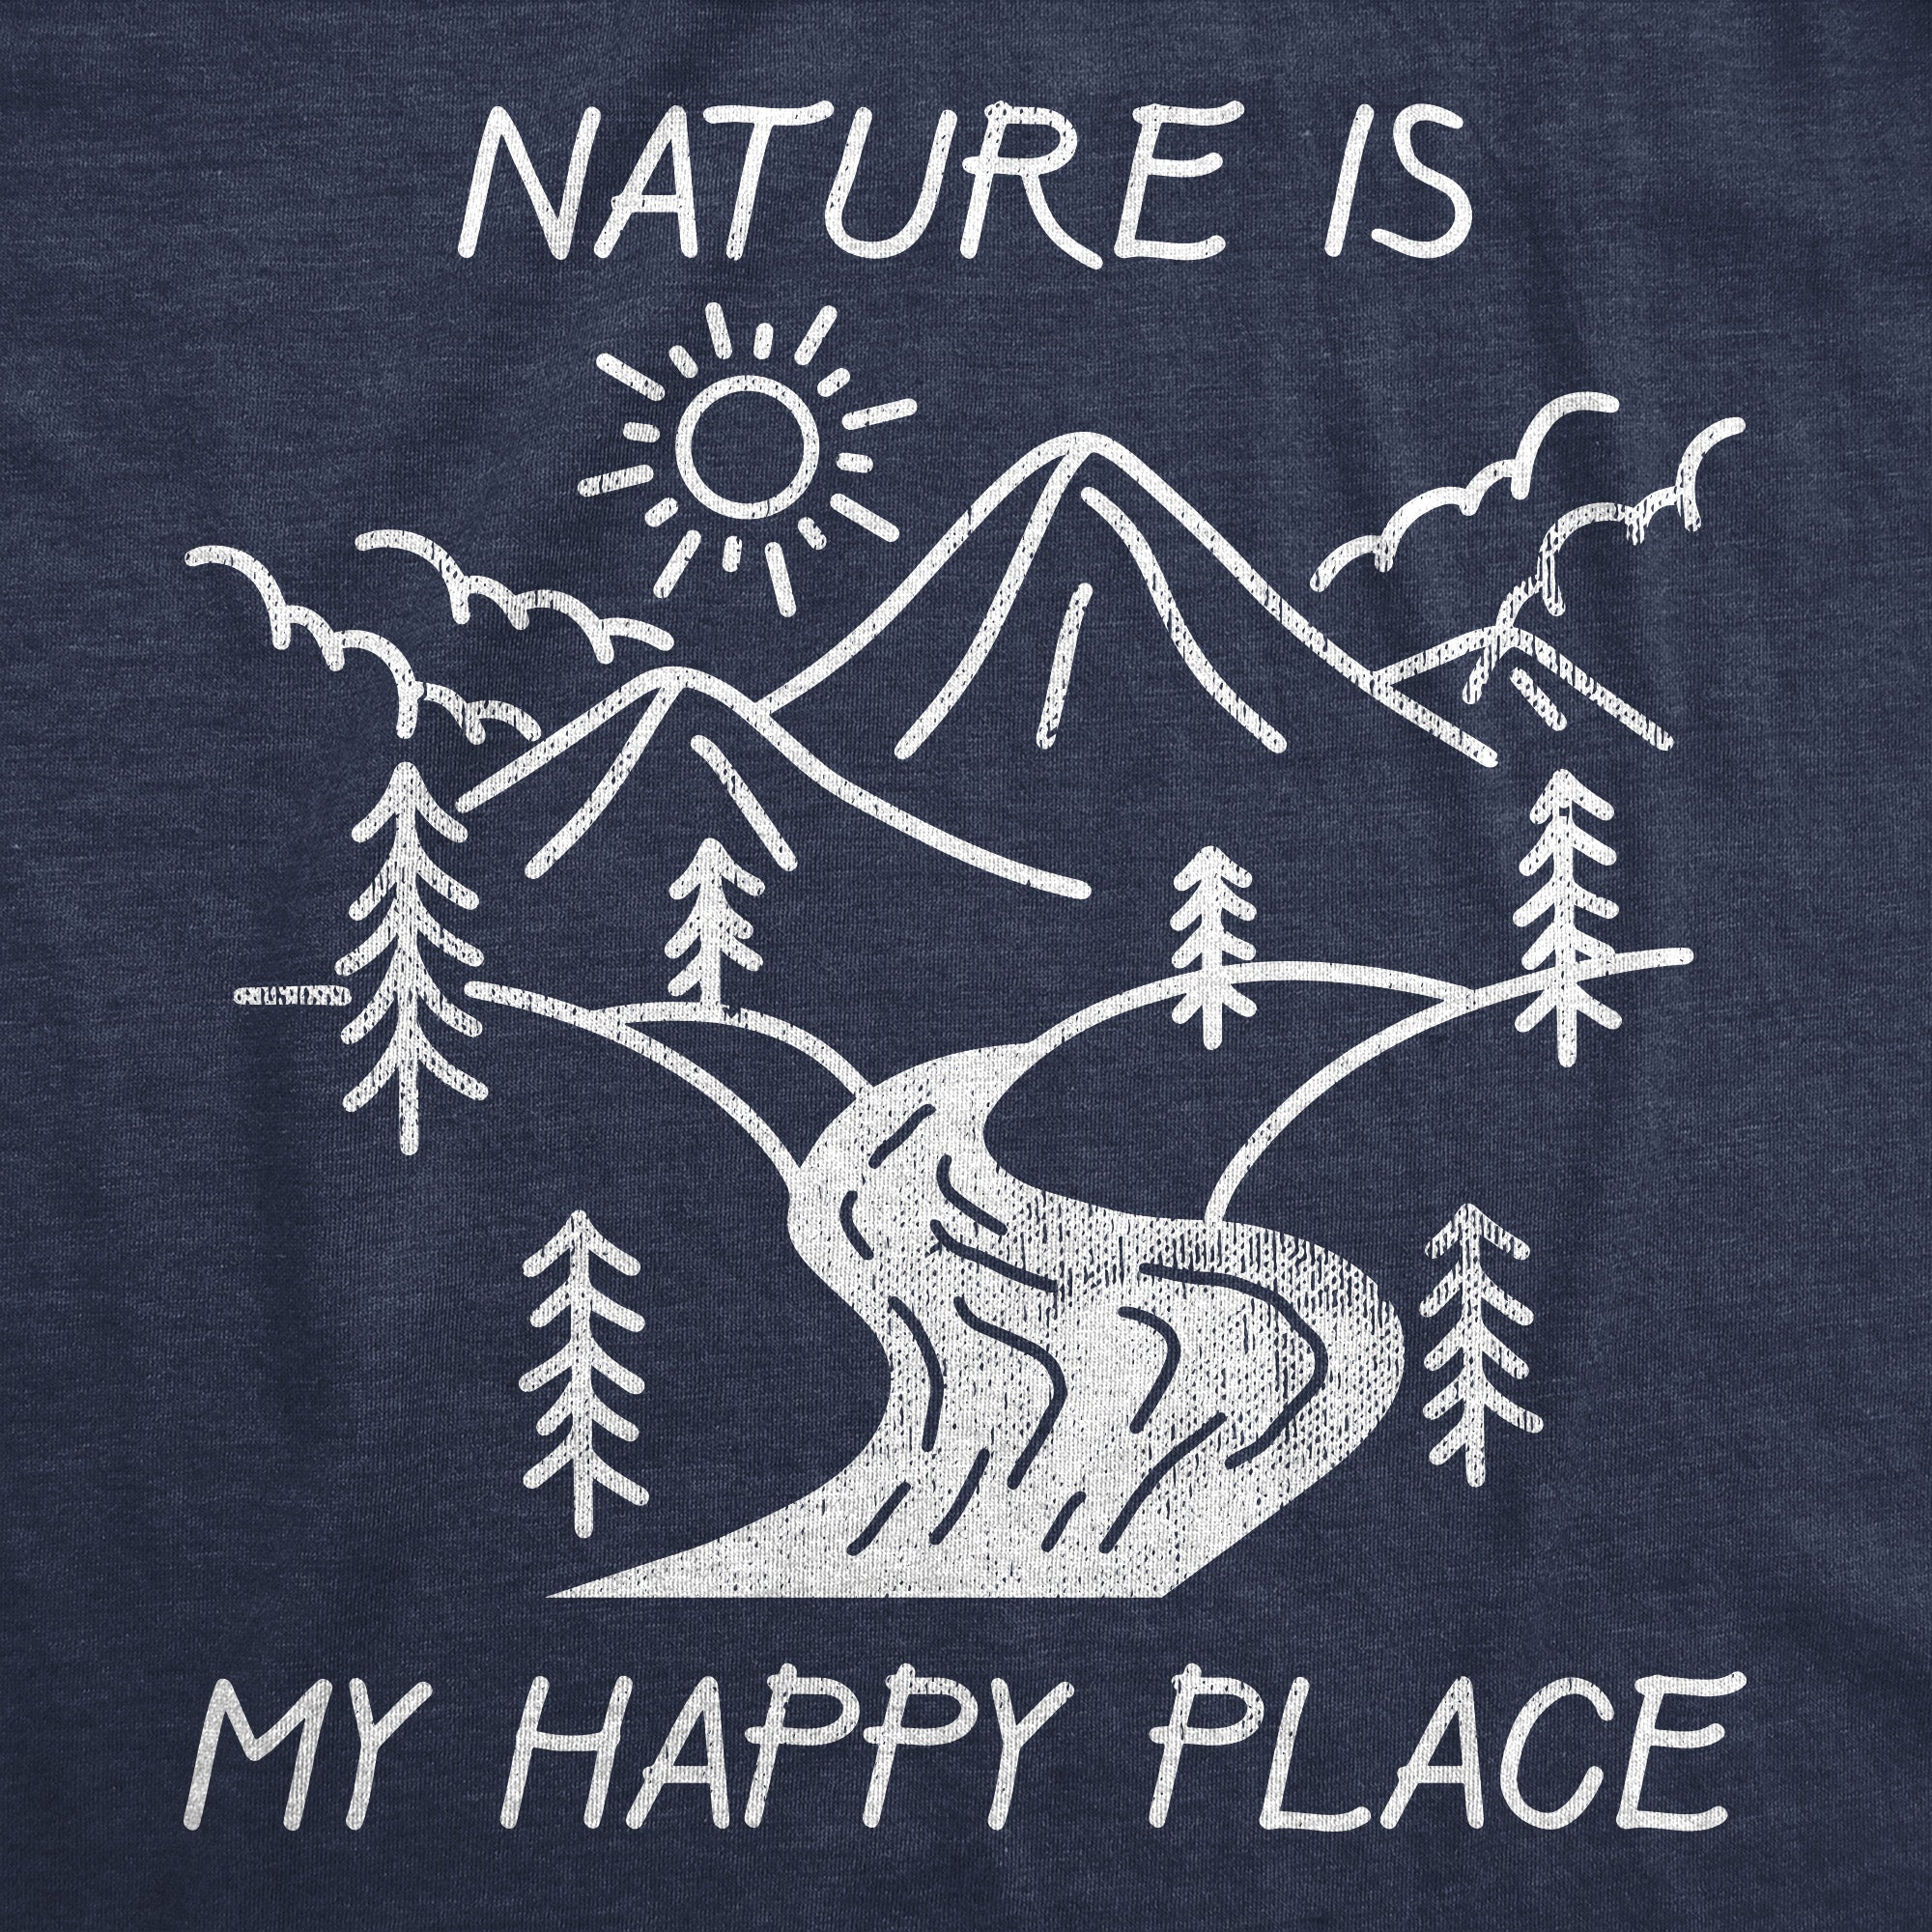 Funny Heather Navy - NATURE Nature Is My Happy Place Mens T Shirt Nerdy Camping Tee